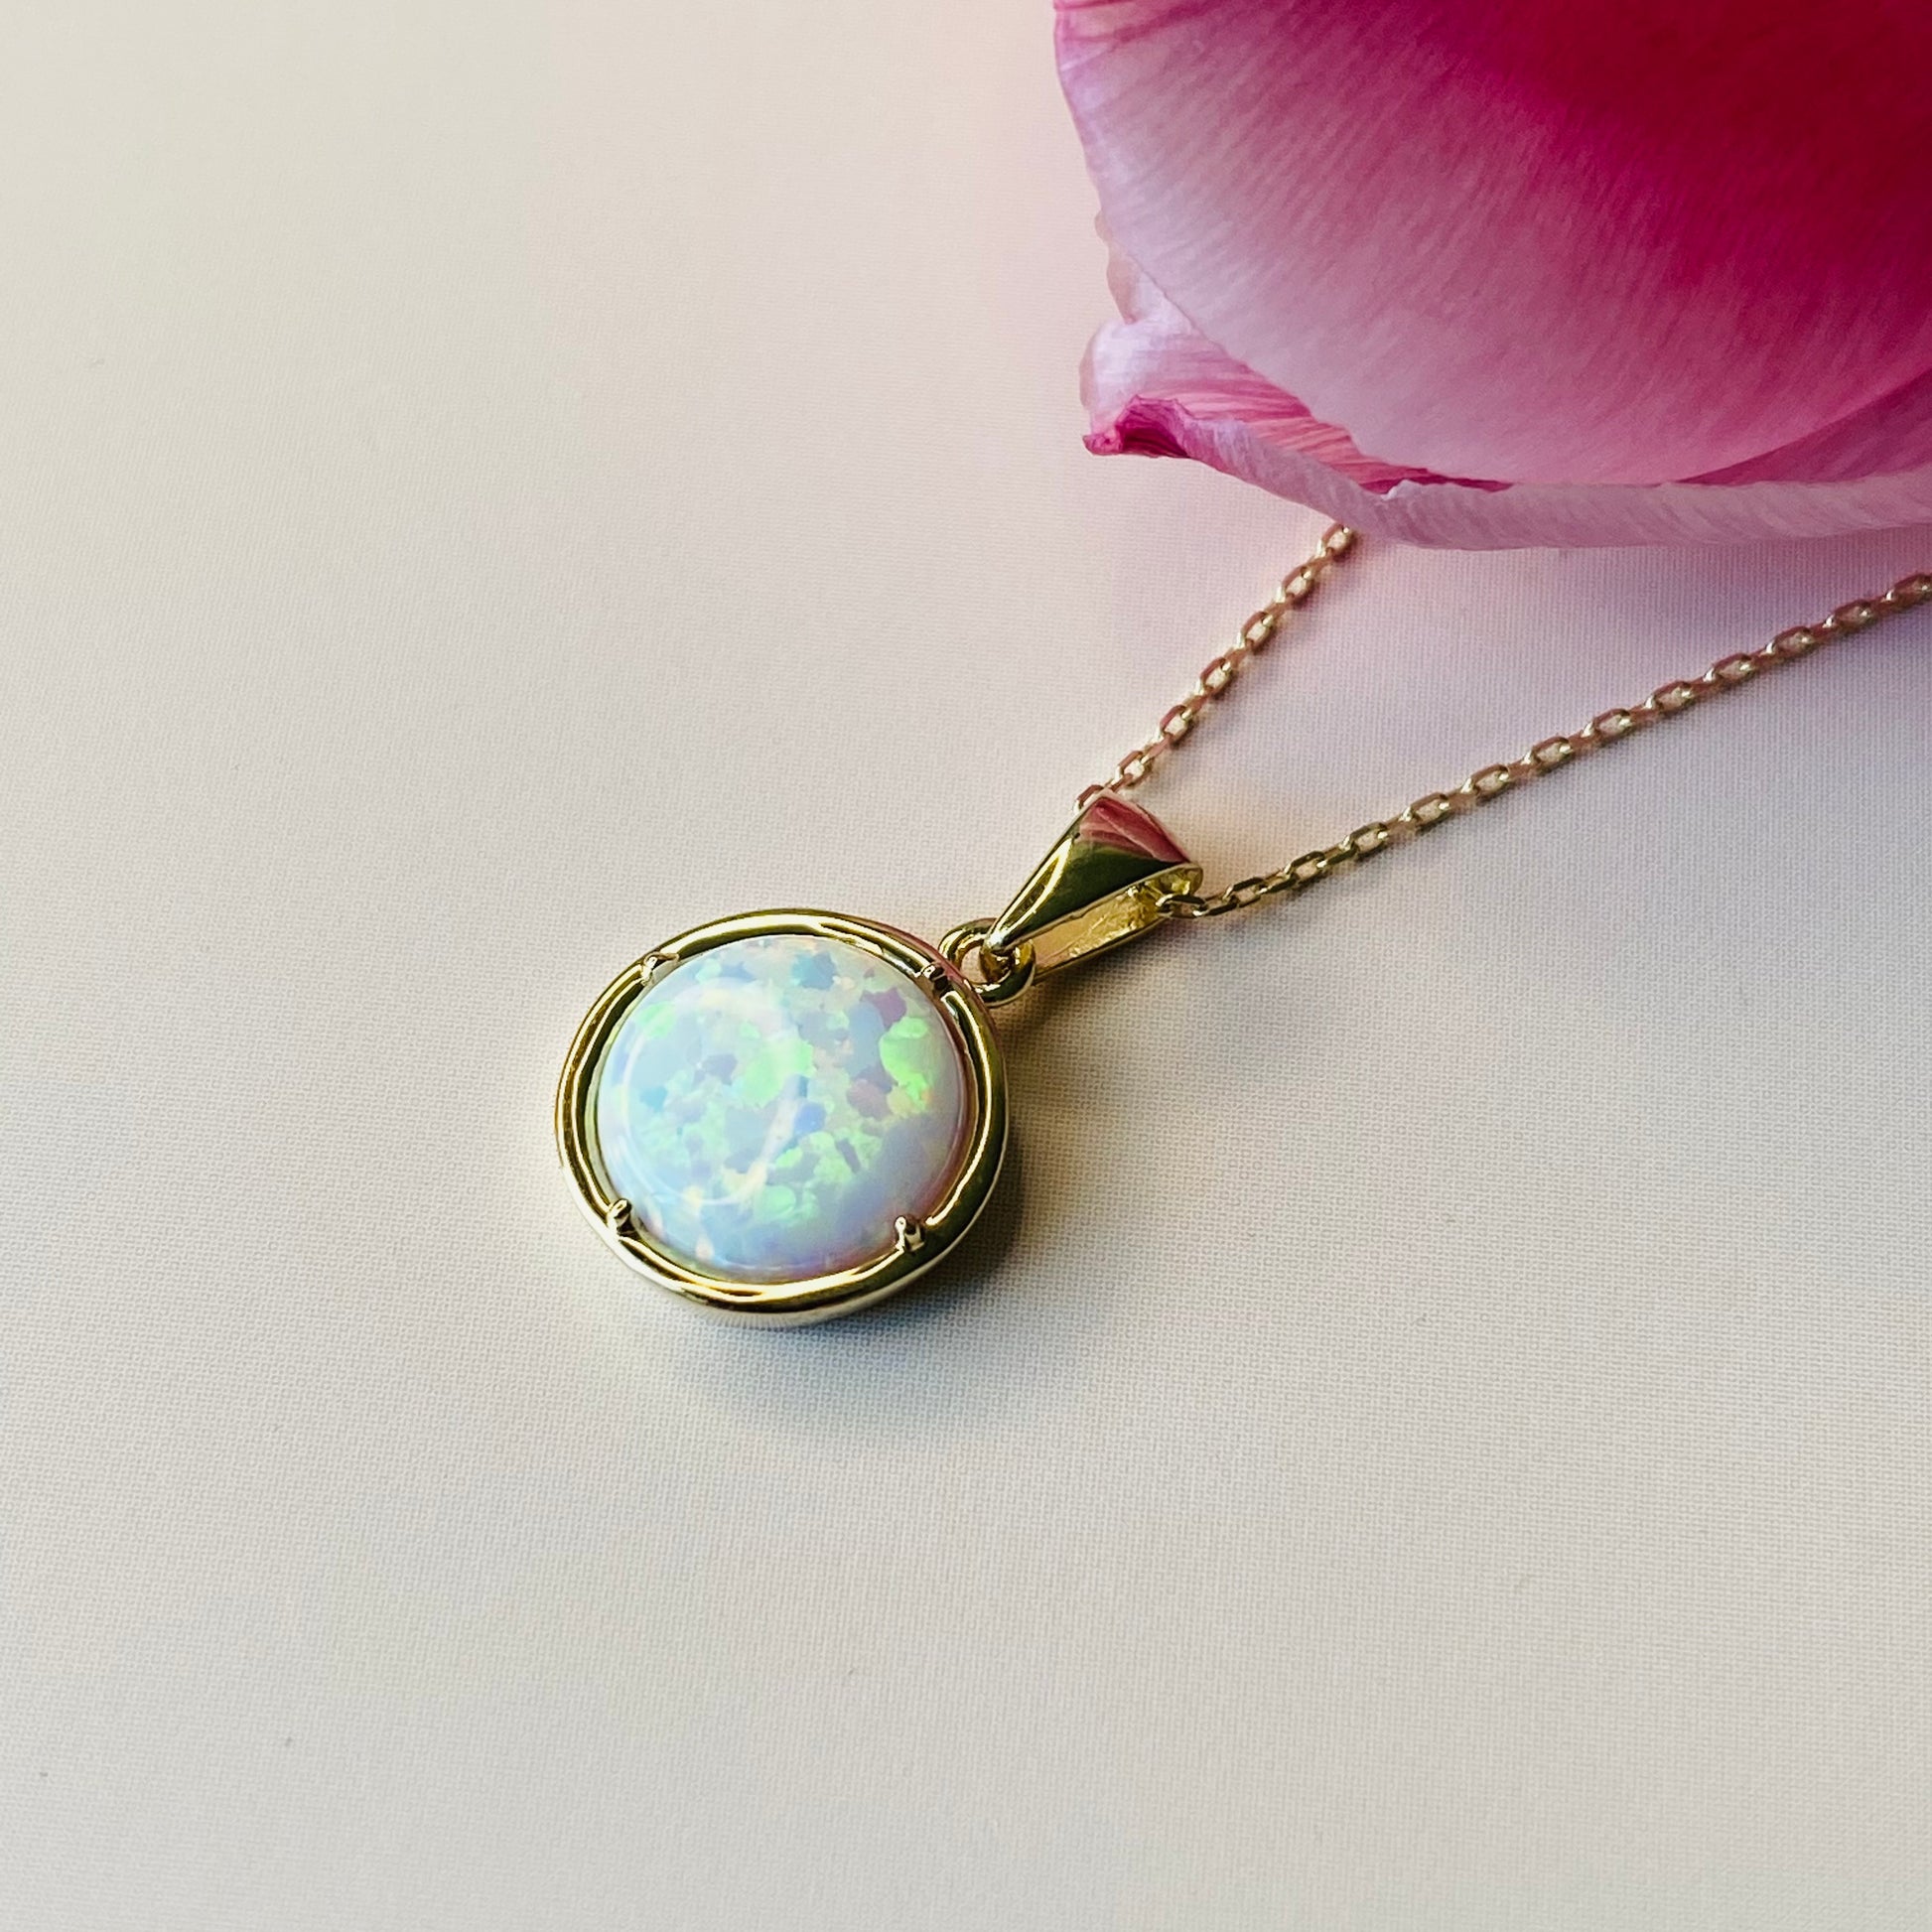 9ct Gold Round Opalique Pendant Necklace - John Ross Jewellers